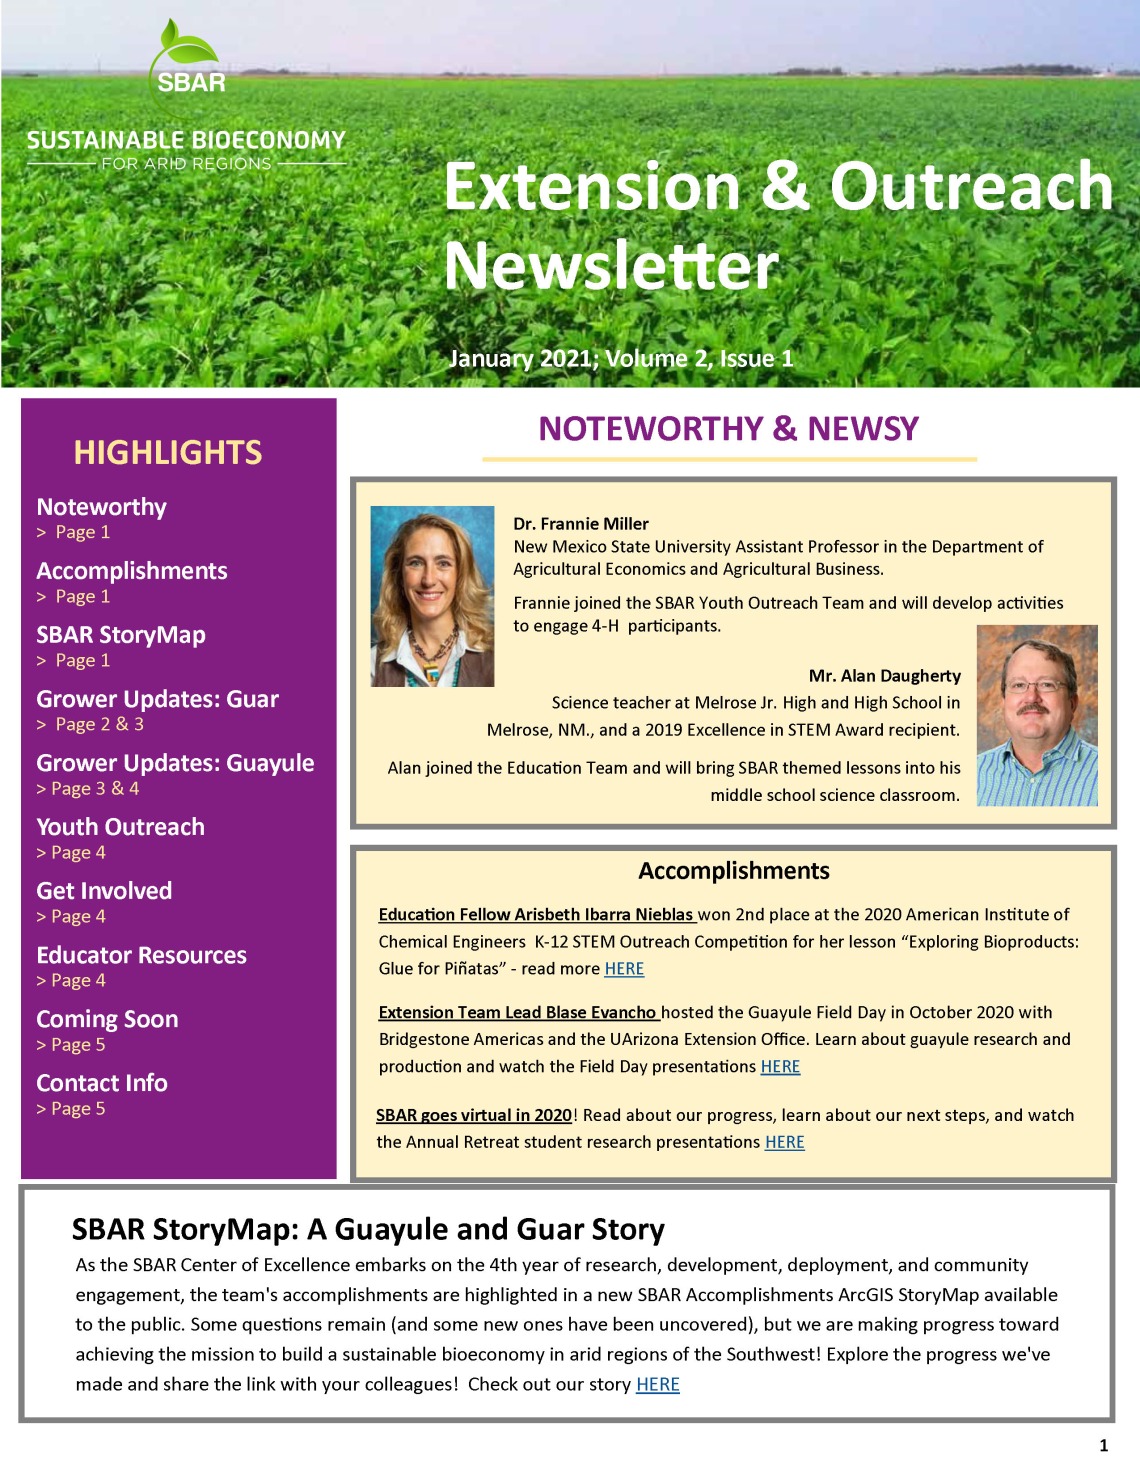 SBAR Extension and Outreach Newsletter Jan 2021